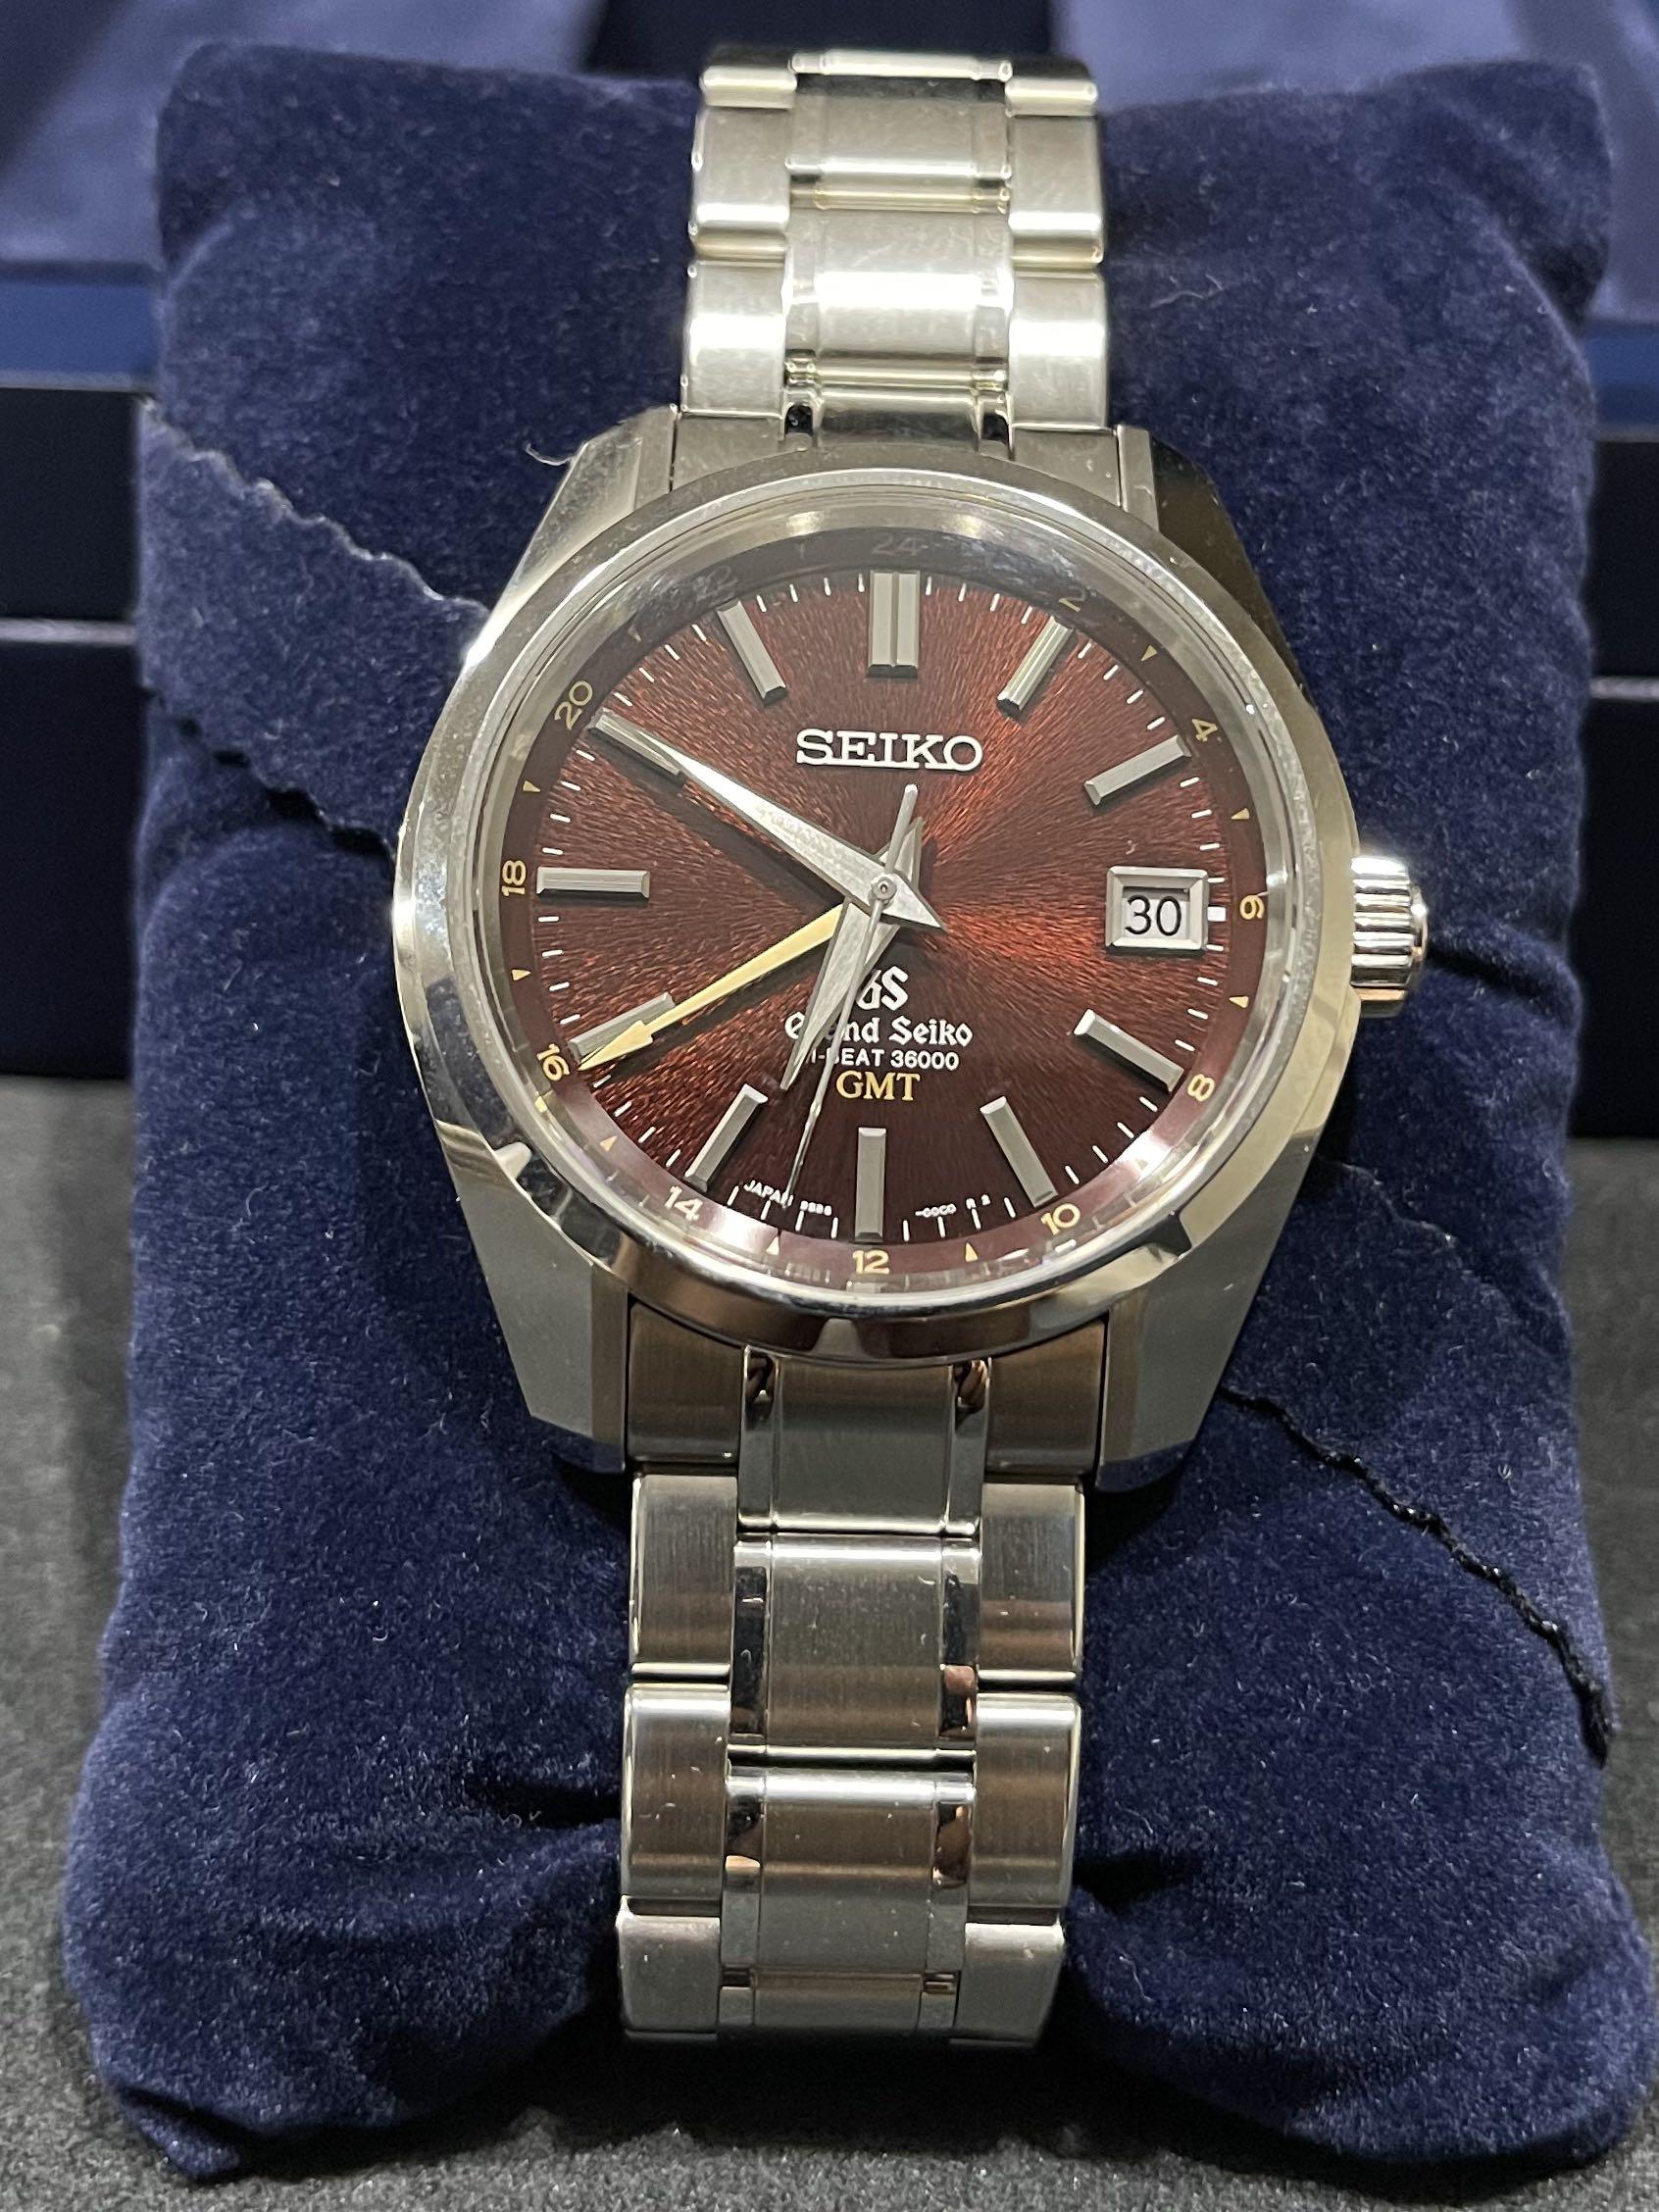 GRAND SEIKO HI-BEAT 36000 GMT LIMITED EDITION SBGJ021 NOS, Luxury, Watches  on Carousell